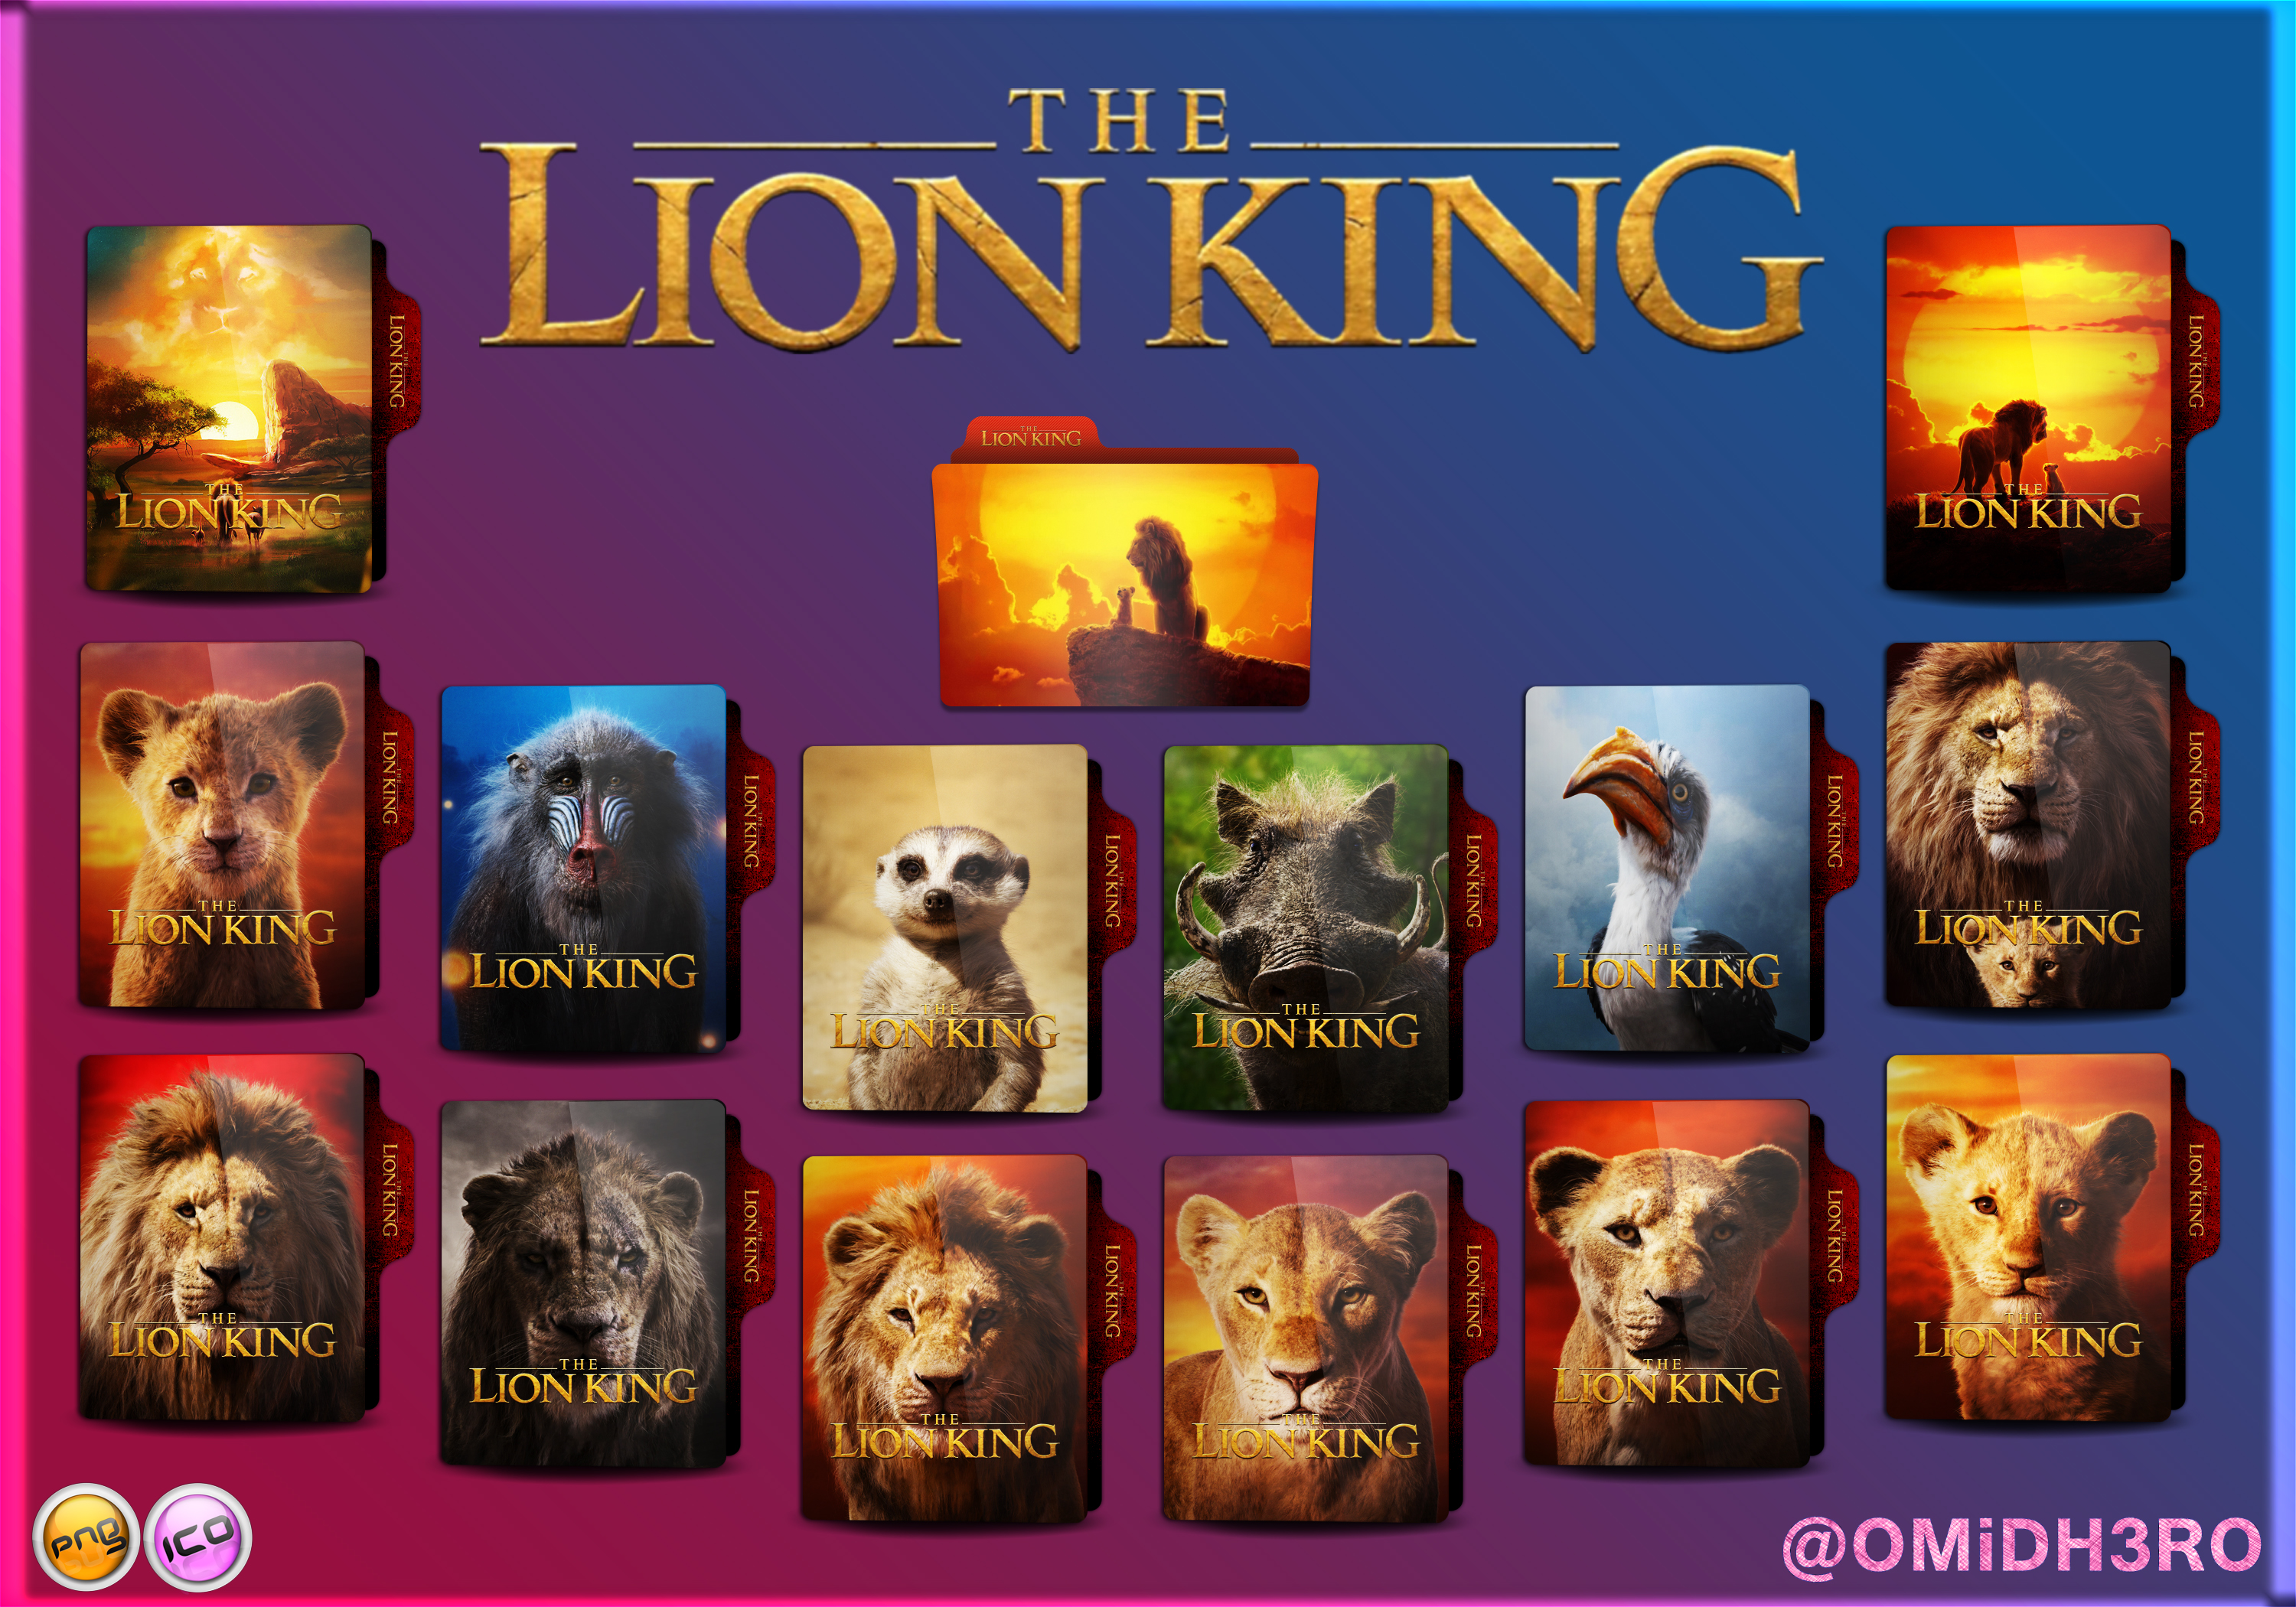 The Lion King (2019) Folder Icon Pack by OMiDH3RO on DeviantArt